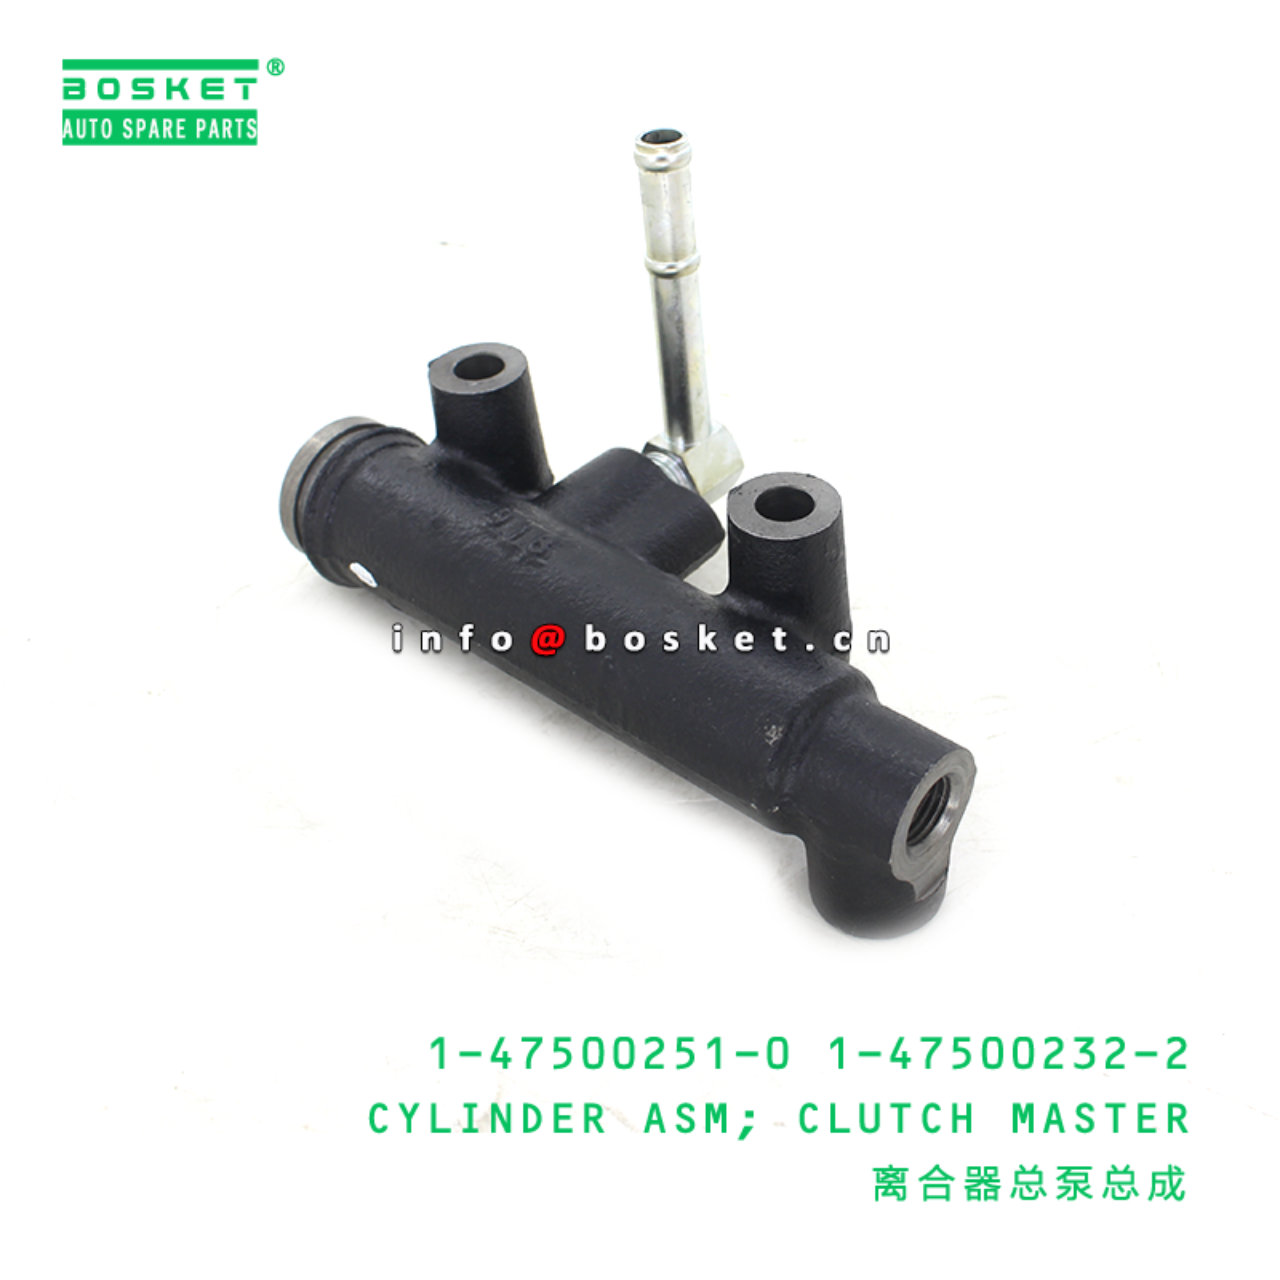 1-47500251-0 1-47500232-2 Clutch Master Cylinder Assembly 1475002510 1475002322 Suitable for ISUZU C